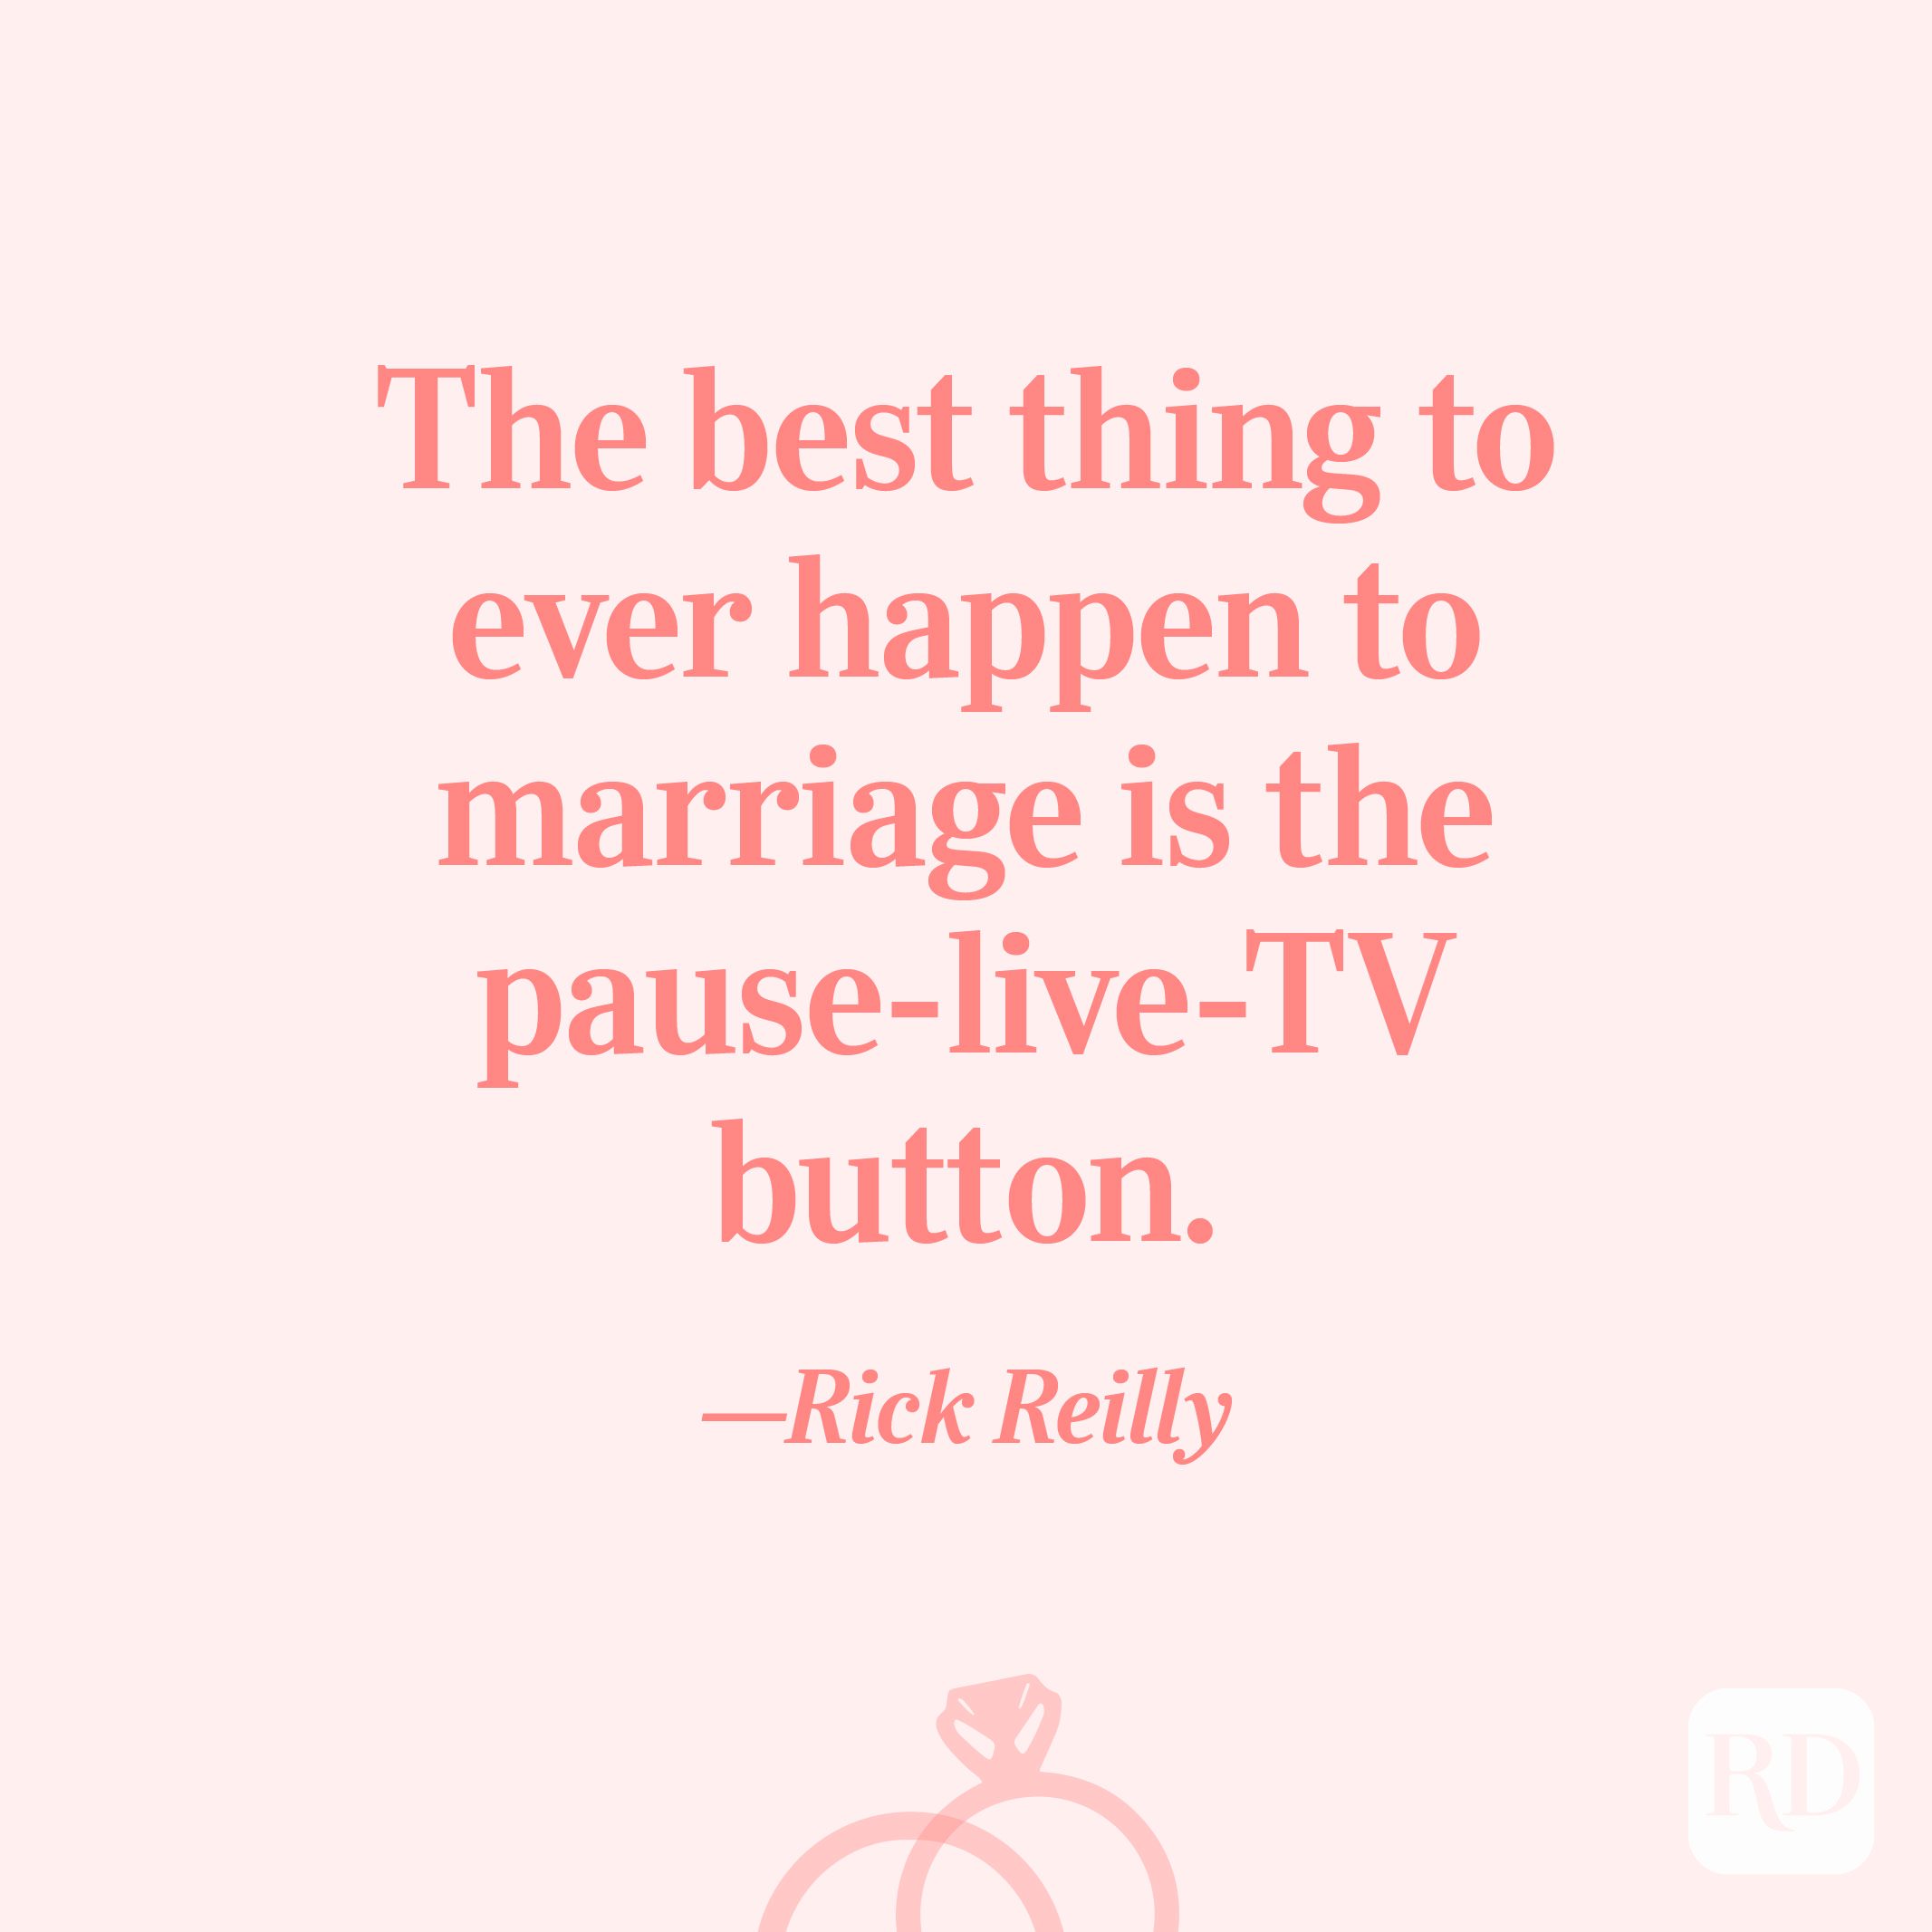 “The best thing to ever happen to marriage is the pause-live-TV button.” —Rick Reilly